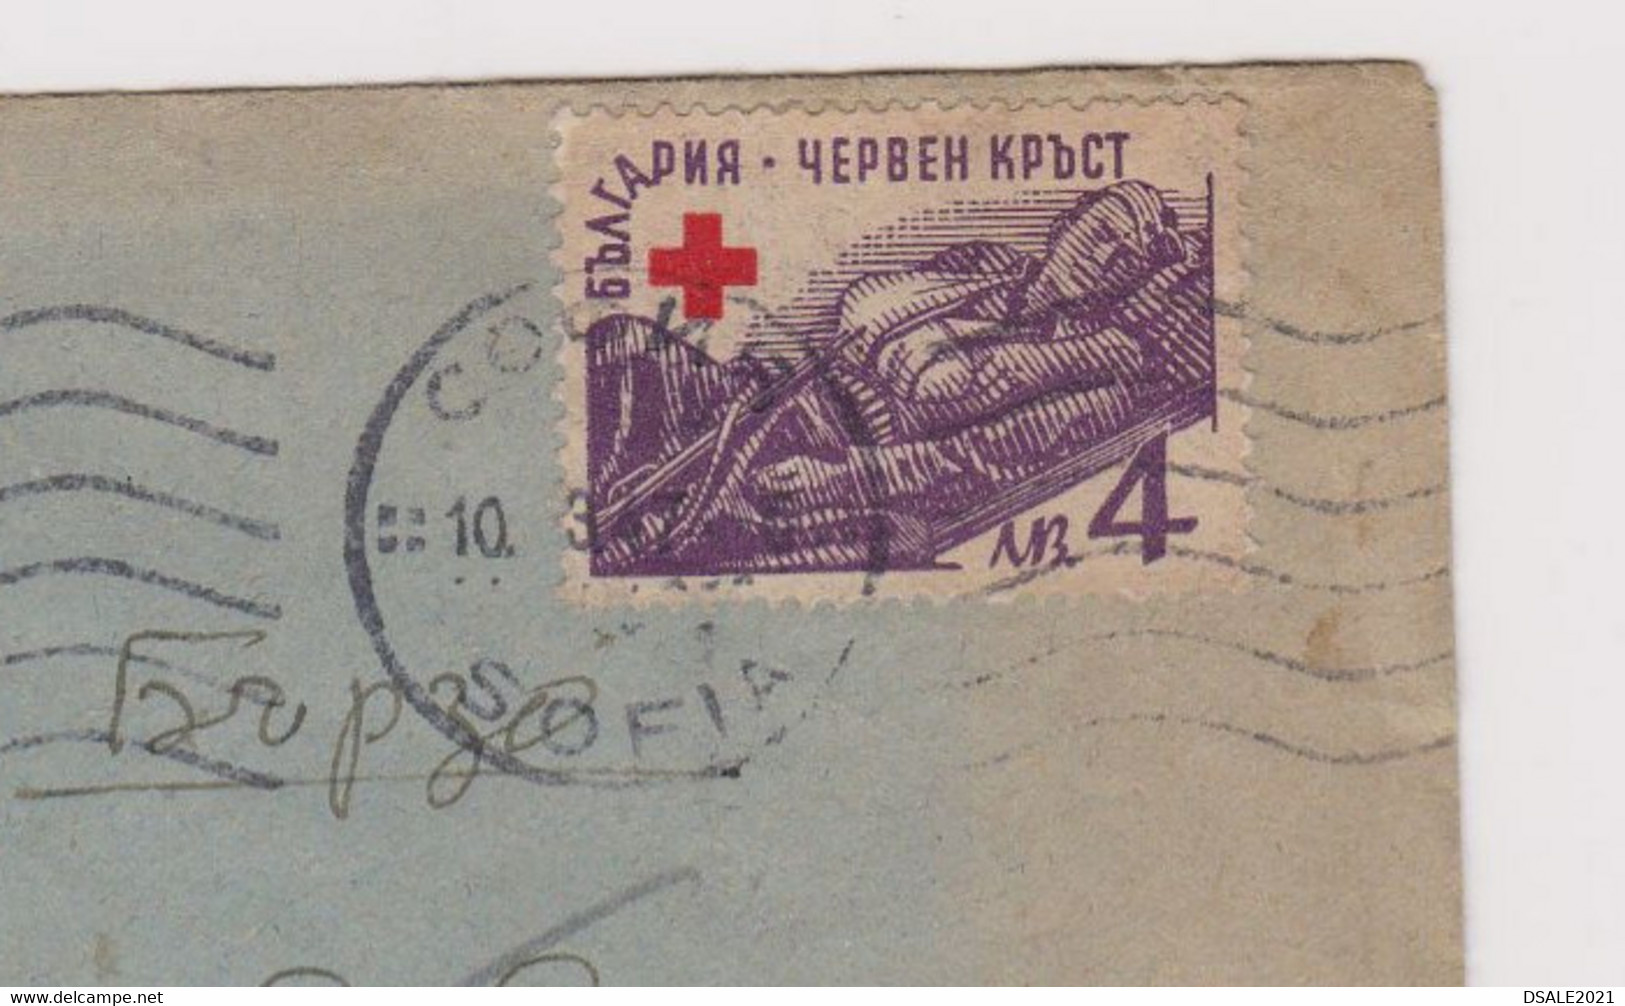 Bulgaria Bulgarie Bulgarije 1947 Cover W/Mi-Nr.517/4Lv. Topic Stamp Red Cross Wounded Soldier Domestic Used (ds438) - Lettres & Documents